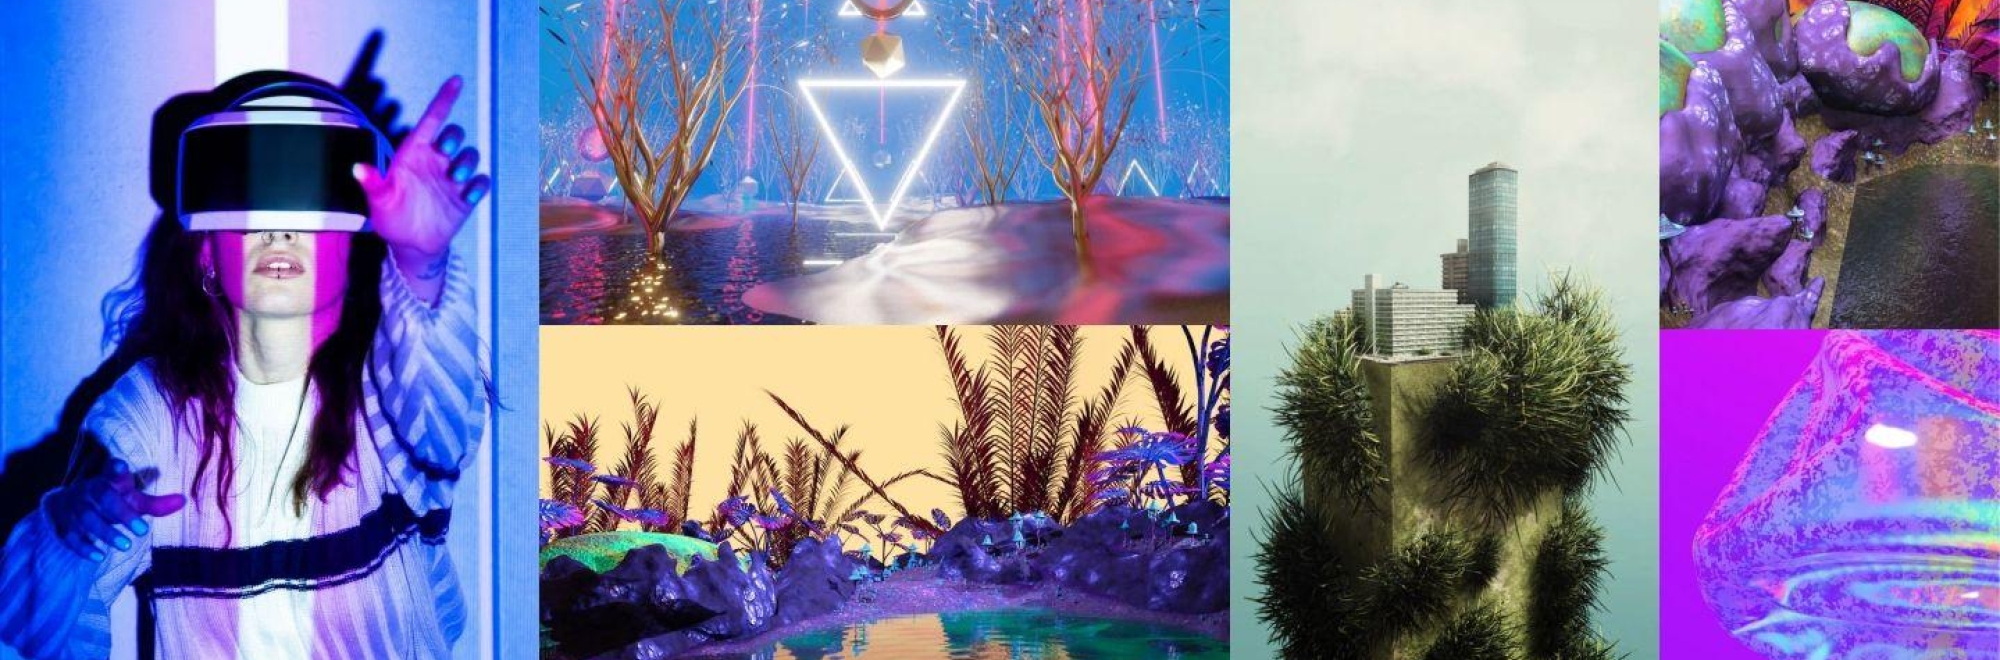 The metaverse, psychedelic art, and Y2K aesthetics: International experts define creative trends for 2022